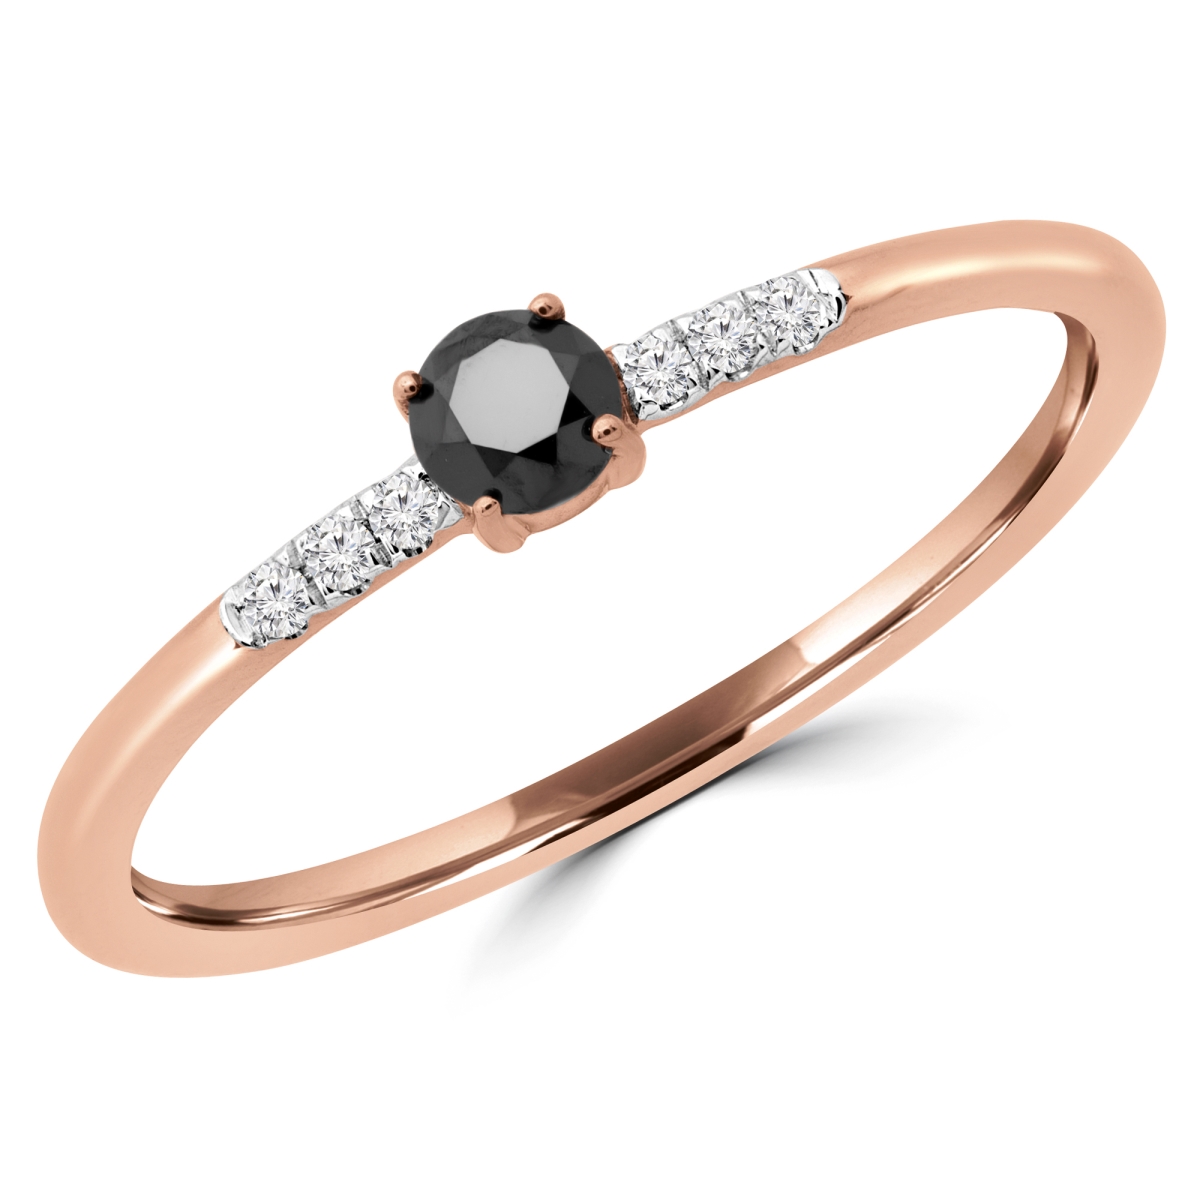 Picture of Majesty Diamonds MDR190079-4.75 0.16 CTW Round Black Diamond Bezel Set Cocktail Ring in 14K Rose Gold - Size 4.75